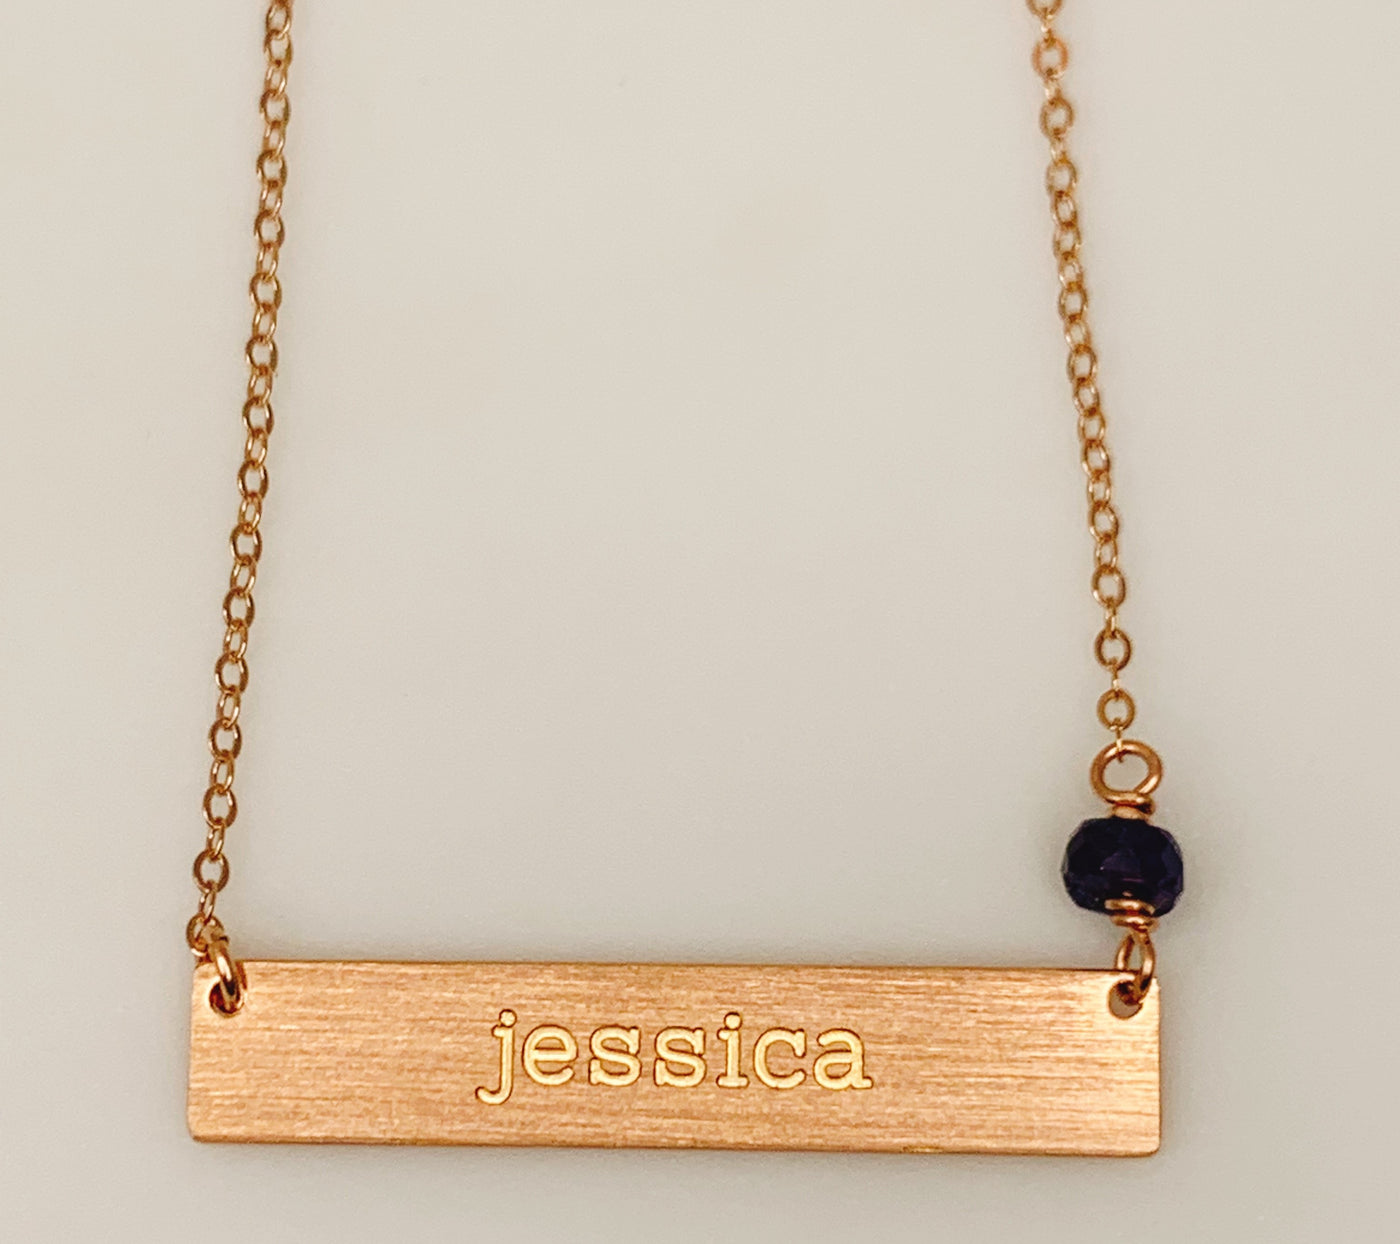 Customized Name Plate Bar Necklace and Birthstone